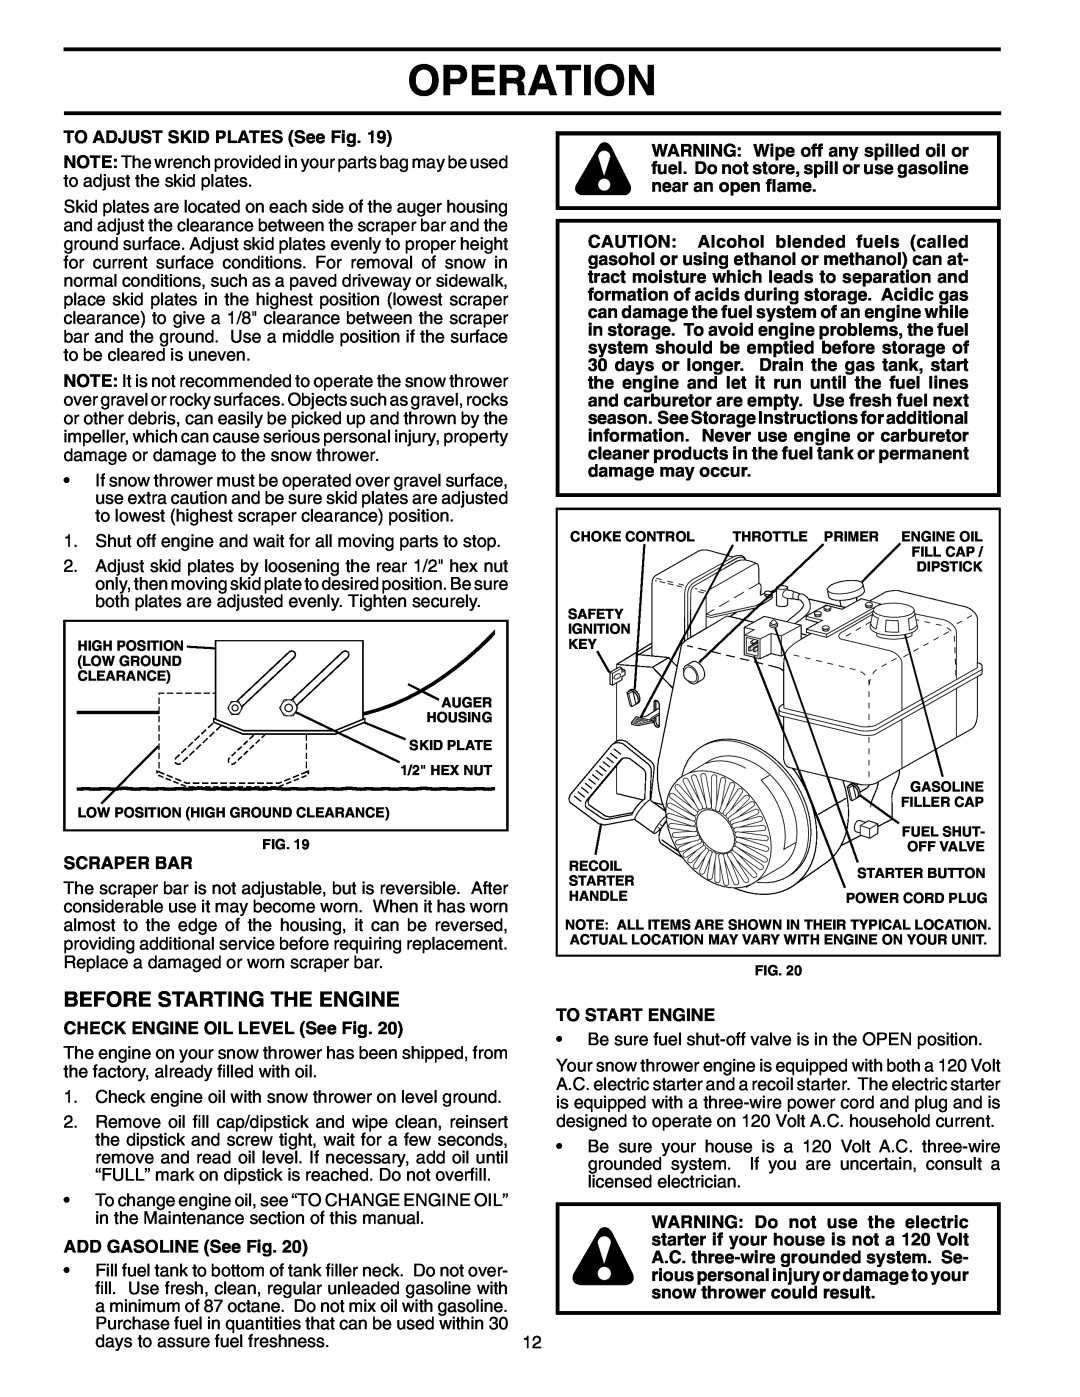 Poulan 96192000400 Before Starting The Engine, Operation, TO ADJUST SKID PLATES See Fig, Scraper Bar, ADD GASOLINE See Fig 